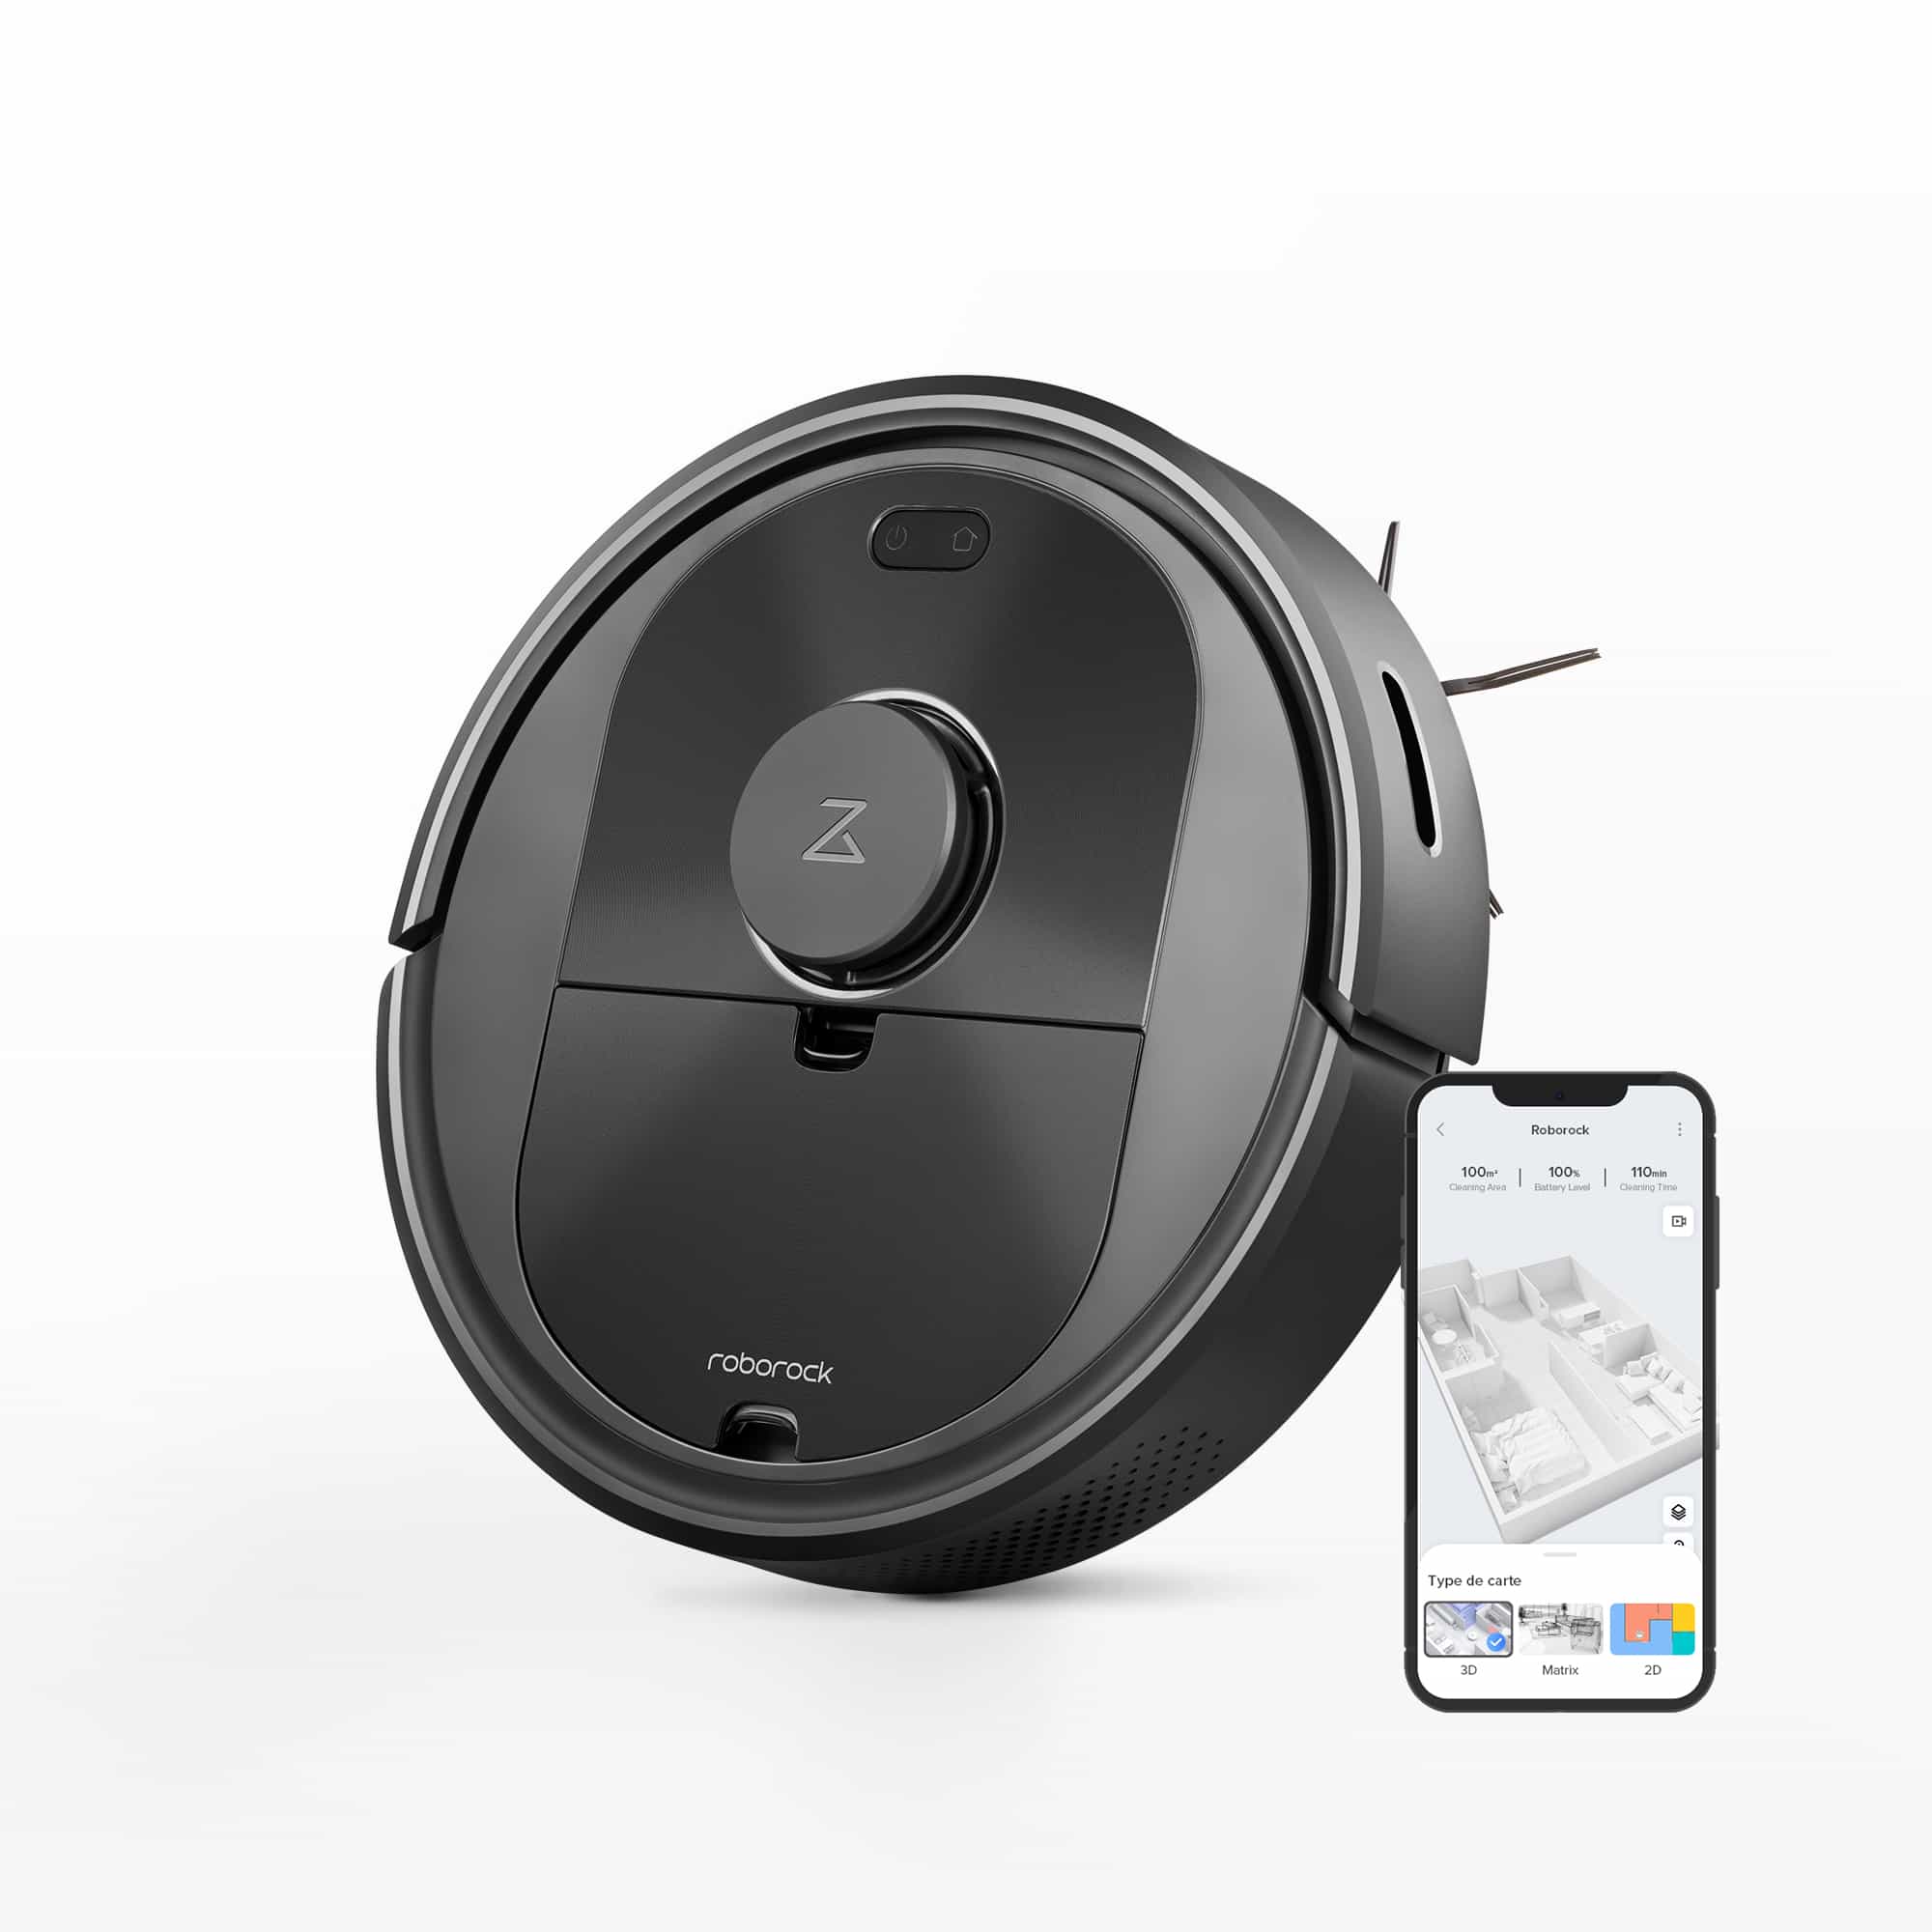 Roborock Q5 Robot Vacuum Cleaner, 2700Pa Suction, Upgraded from S4 Max,  LiDAR Navigation, Multi-Level Mapping, No-go Zones, Ideal for Carpets and  Pet Hair 